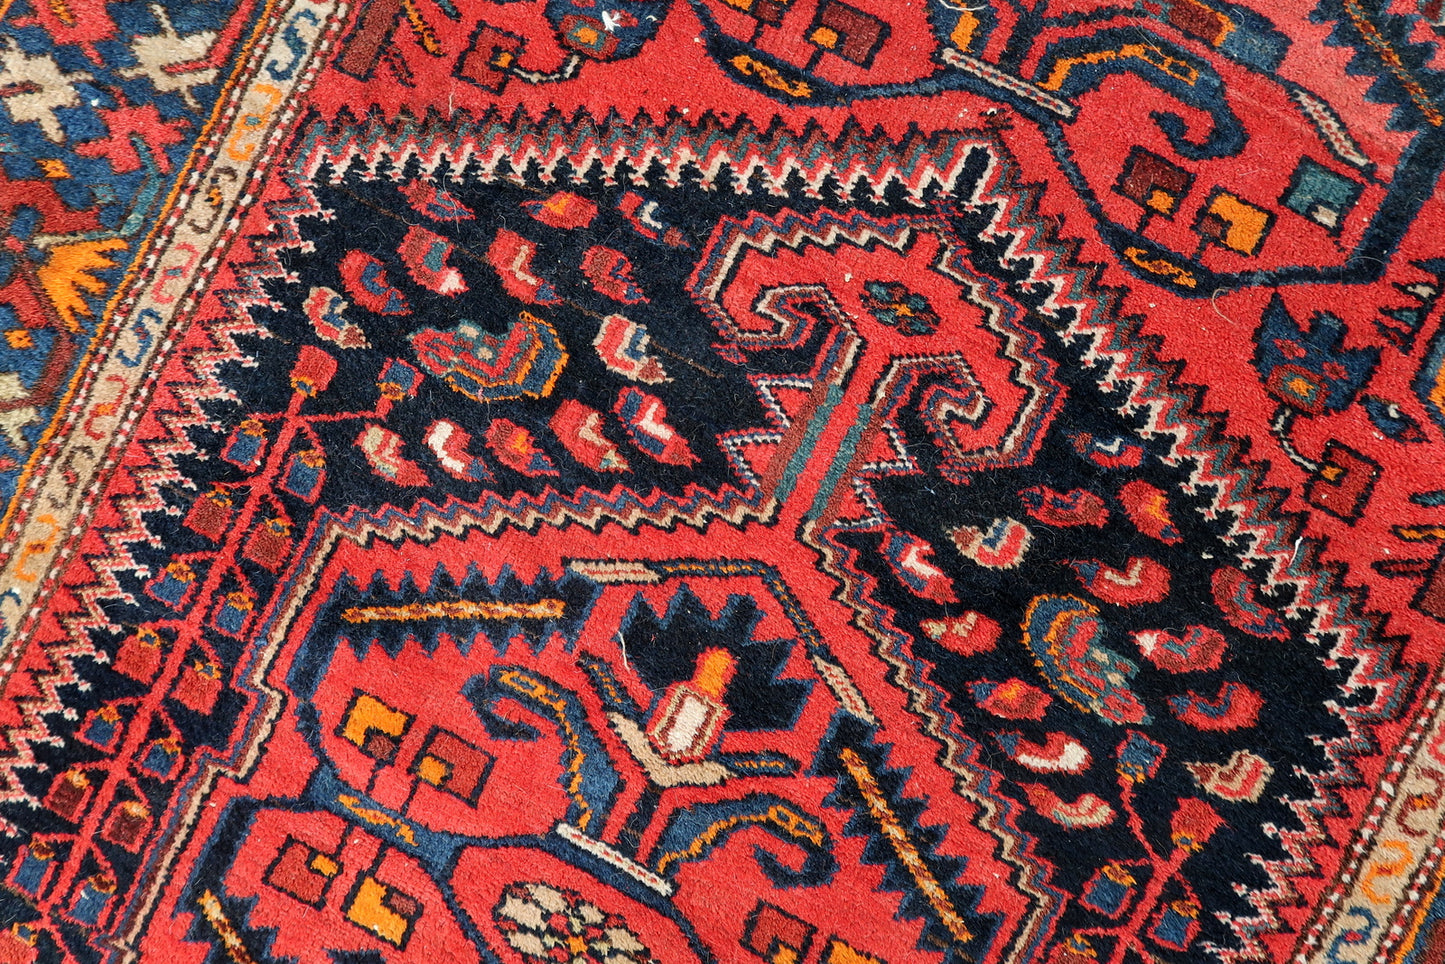 Exquisite Pink and Orange Accents - Vintage Rug Artistry